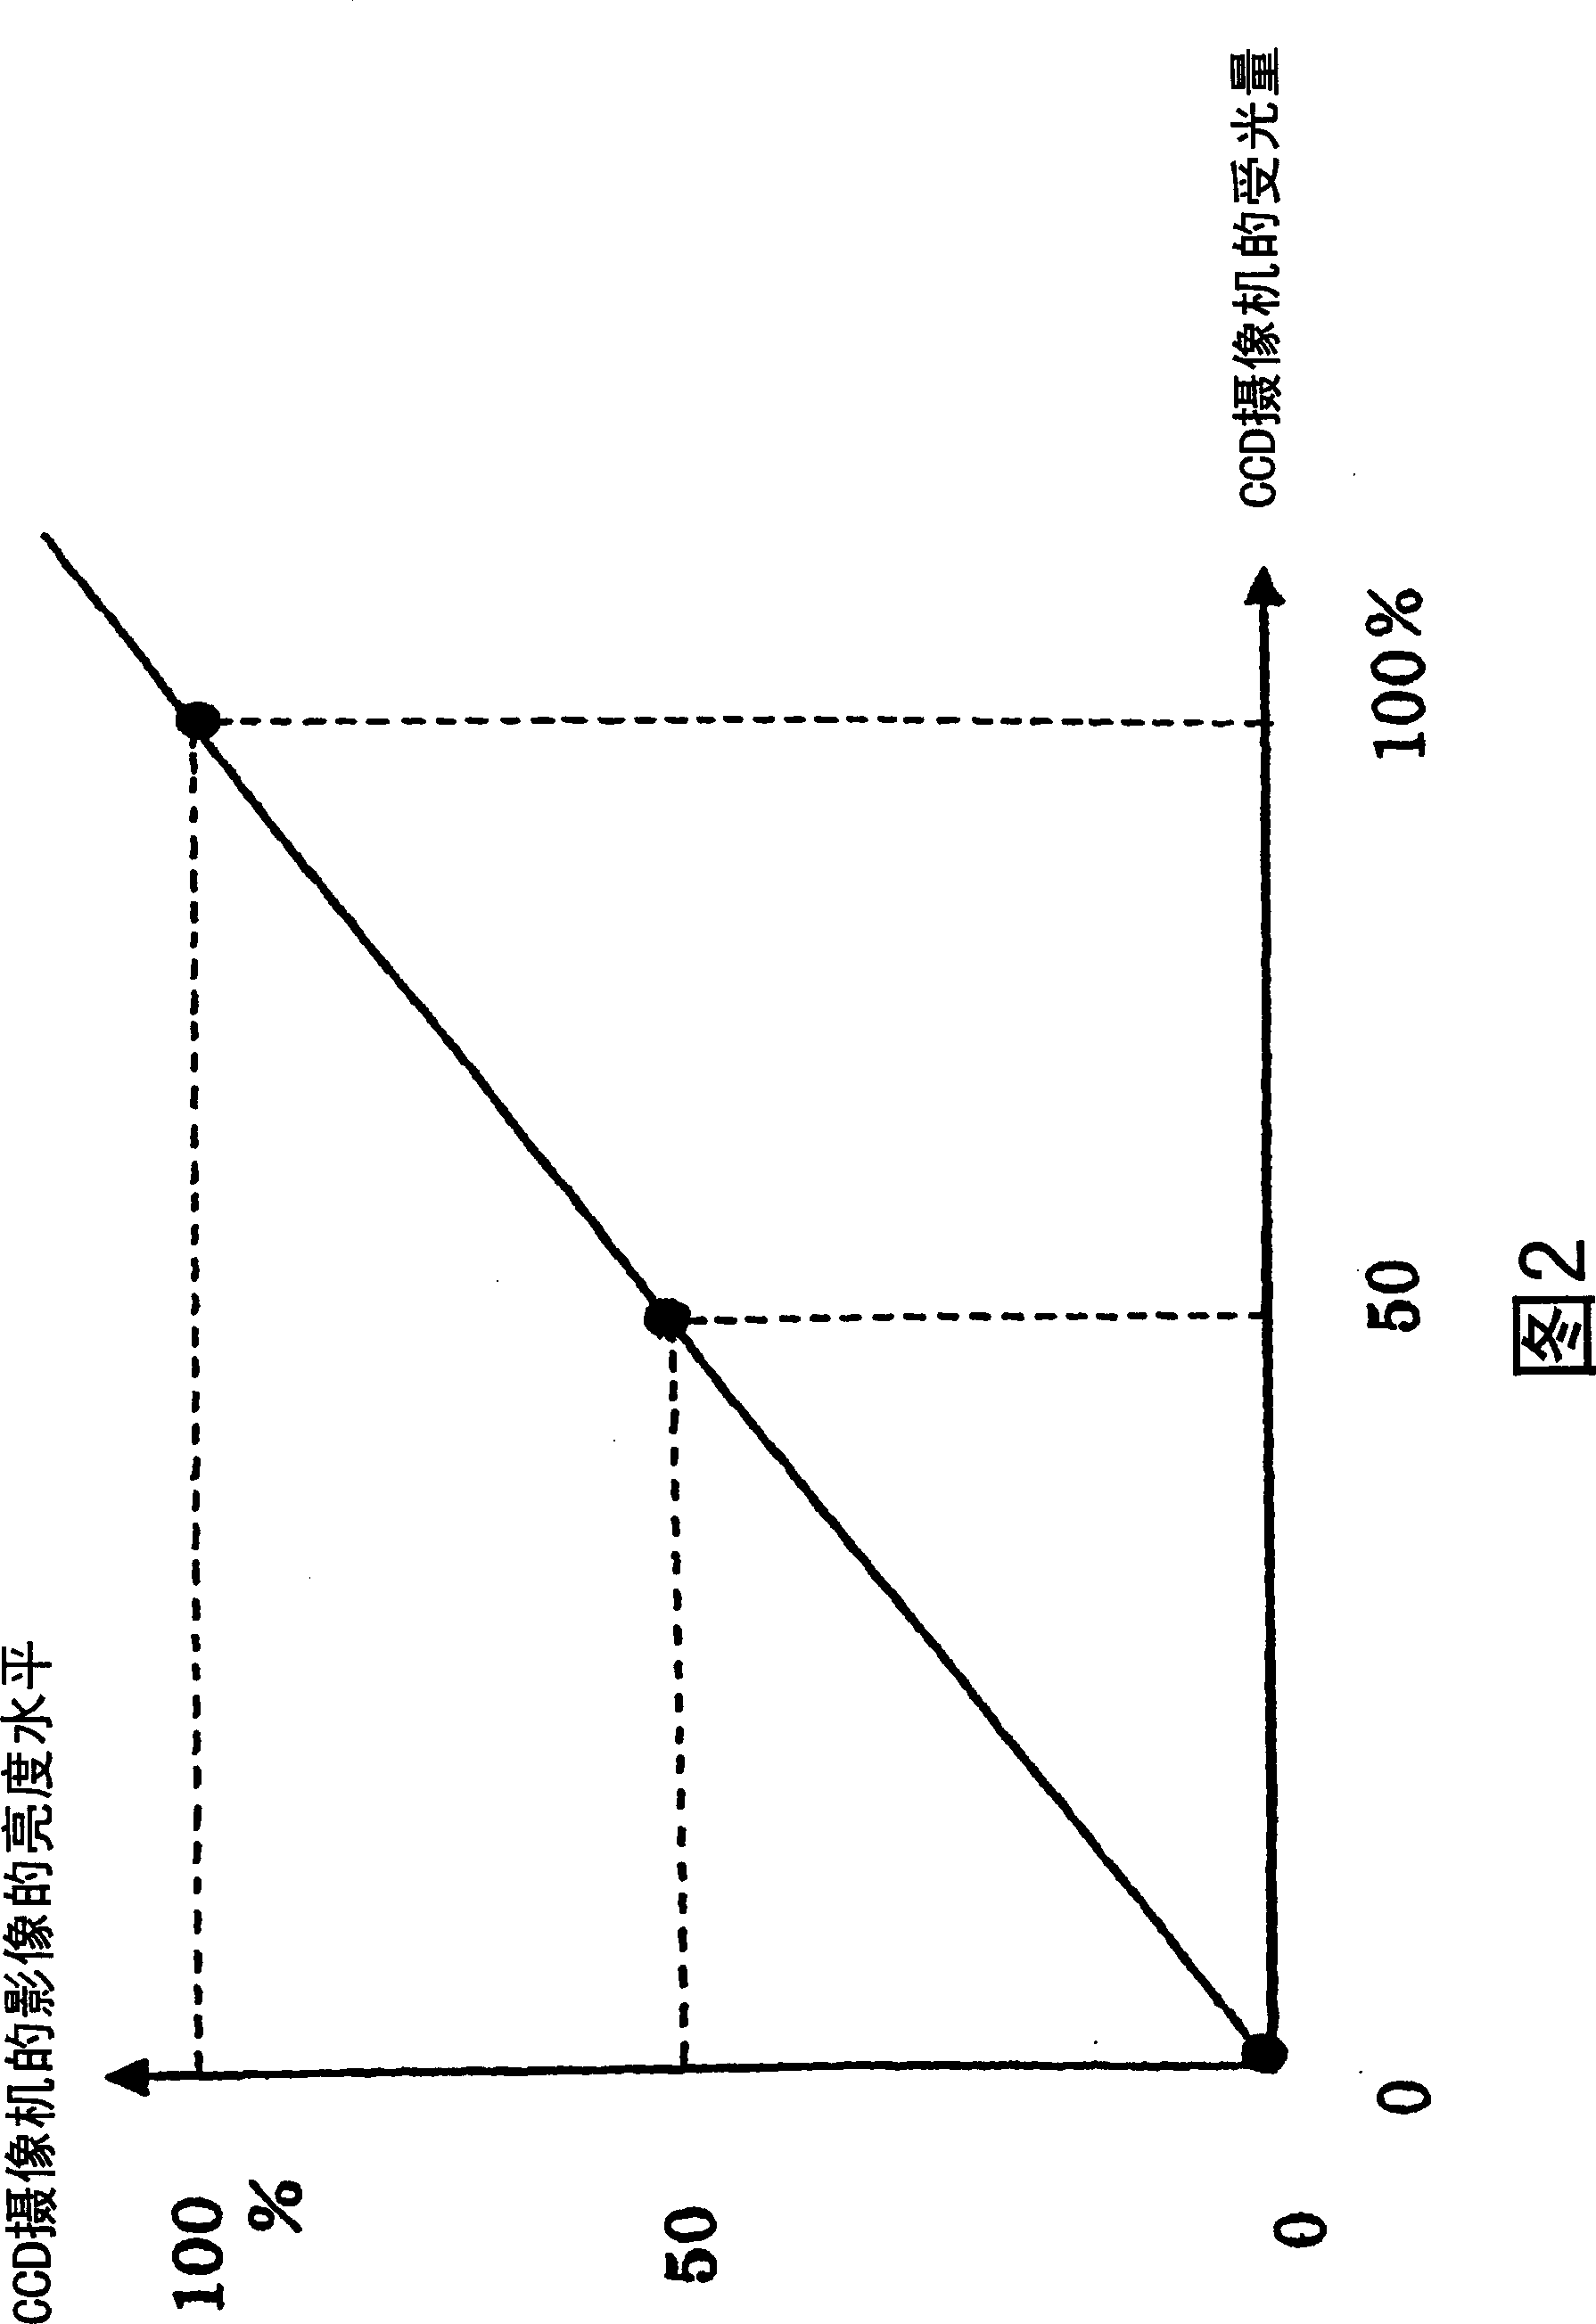 Shape of slit opening and dimming device